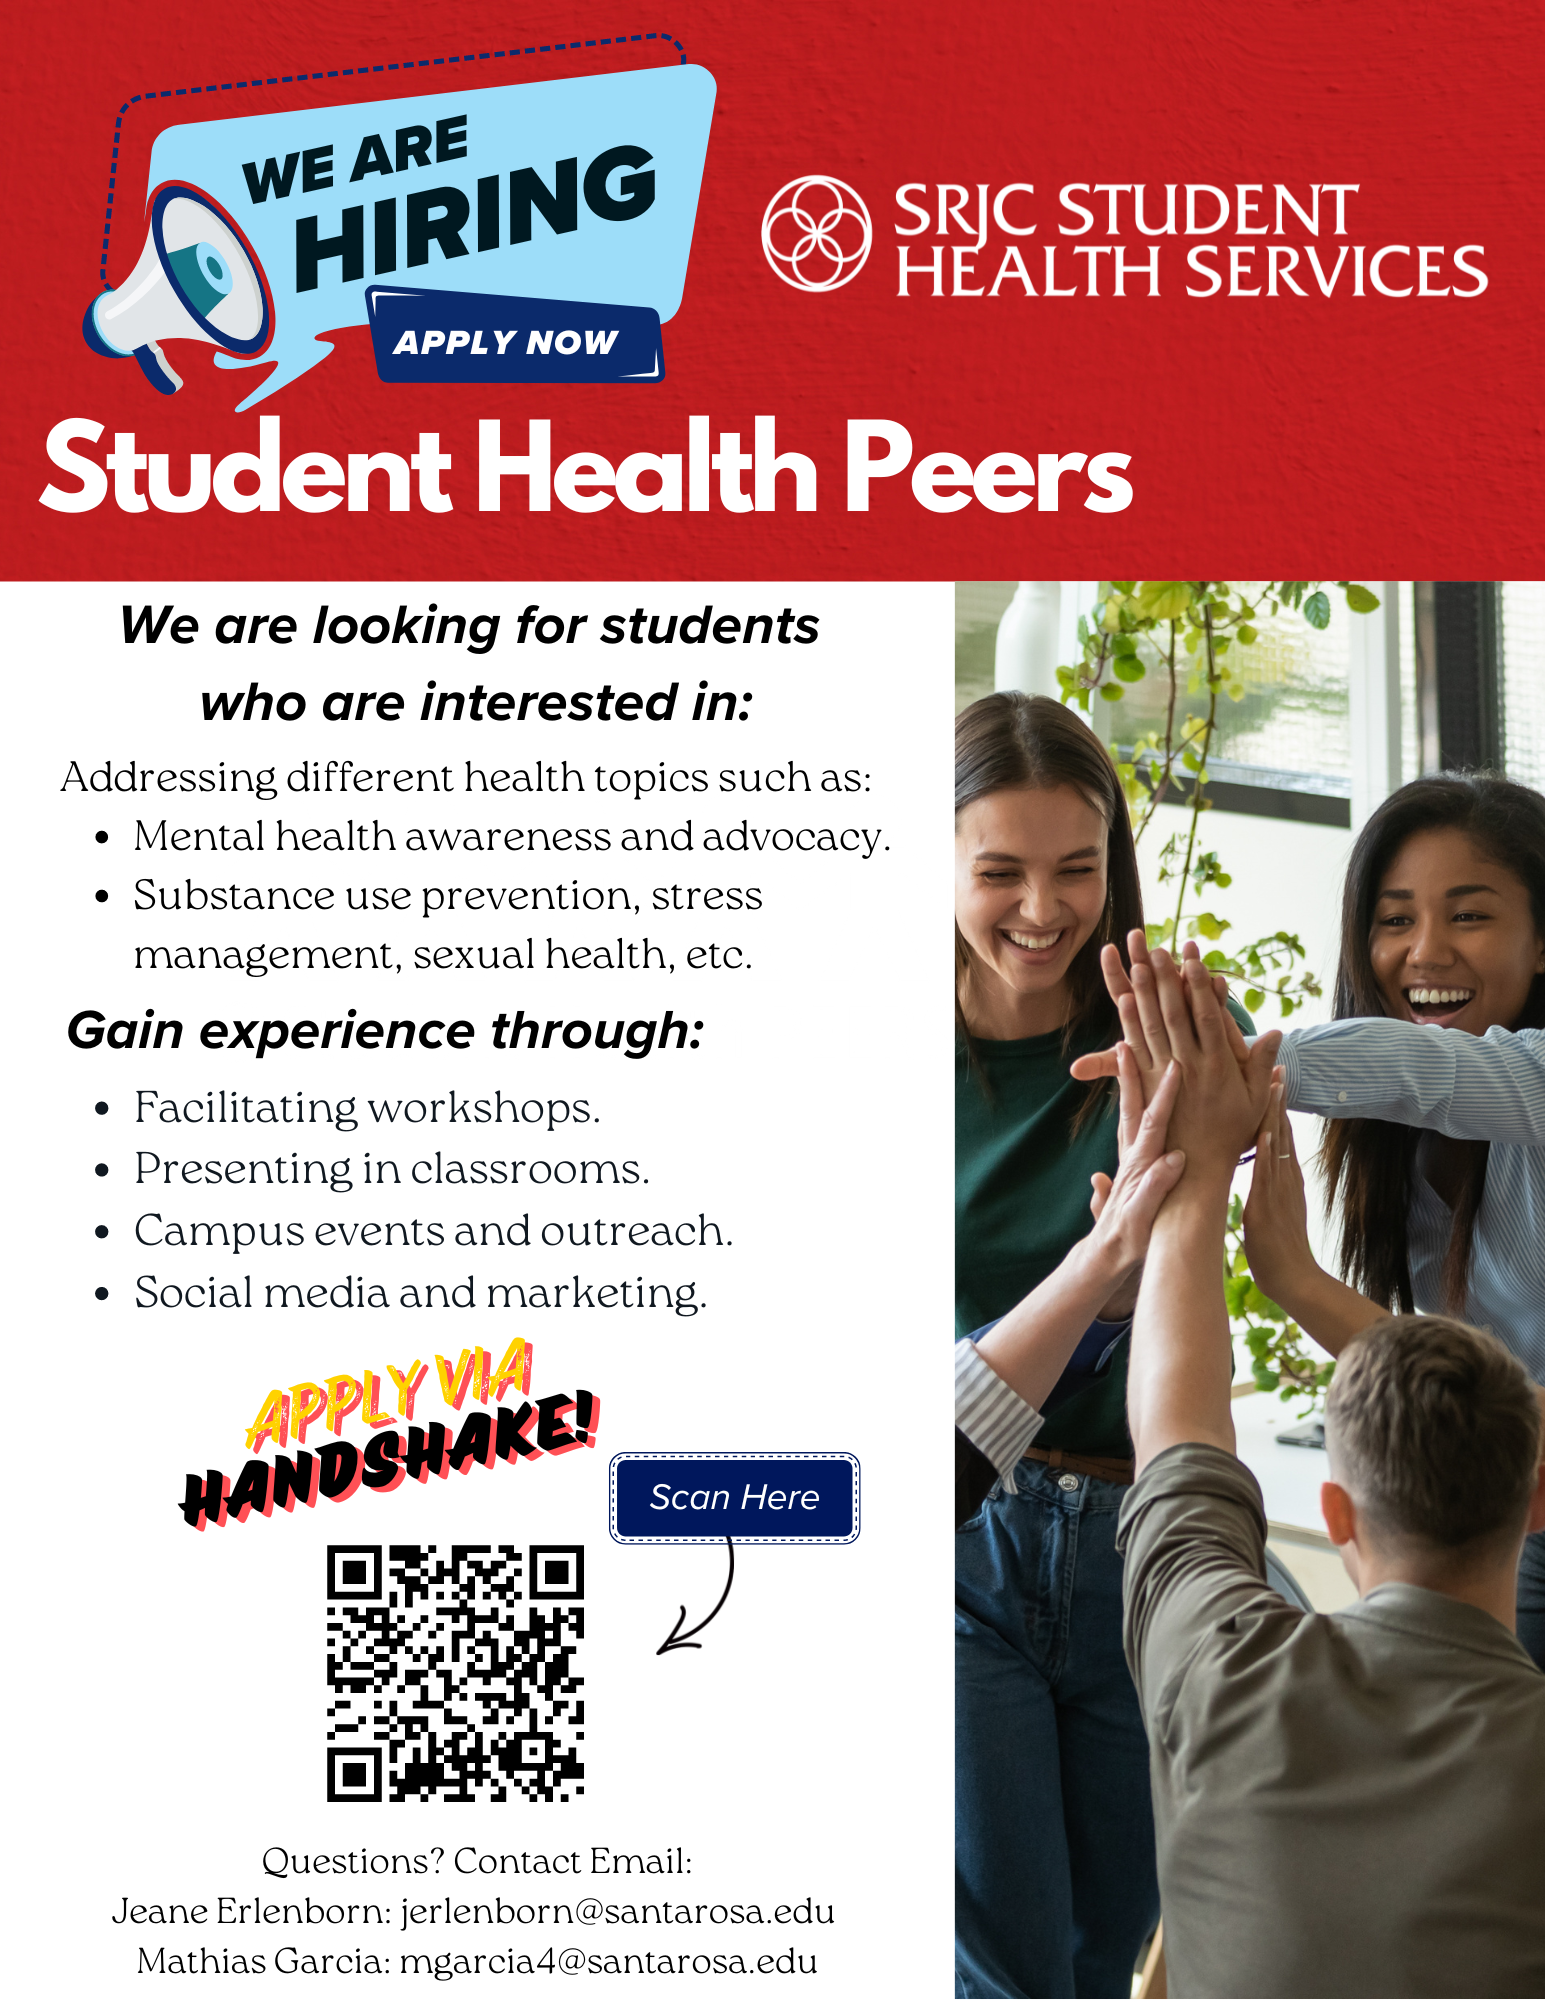 SRJC Student Health Services. We are hiring. Apply now. Student Health Peers. We are looking for students who are interested in: addressing different health topics such as: -mental health awareness and advocacy. -substance use prevention, stress management, sexual health, etc. Gain experience through: -facilitating workshops. -presenting in classrooms. -campus events and outreach. -social media and marketing. Questions? Contact Email: Jeane Erlenborn: jerlenborn@santarosa.edu Mathias Garcia: mgarcia4@santarosa.edu Apply via handshake! https://app.joinhandshake.com/jobs/8965461/share_preview